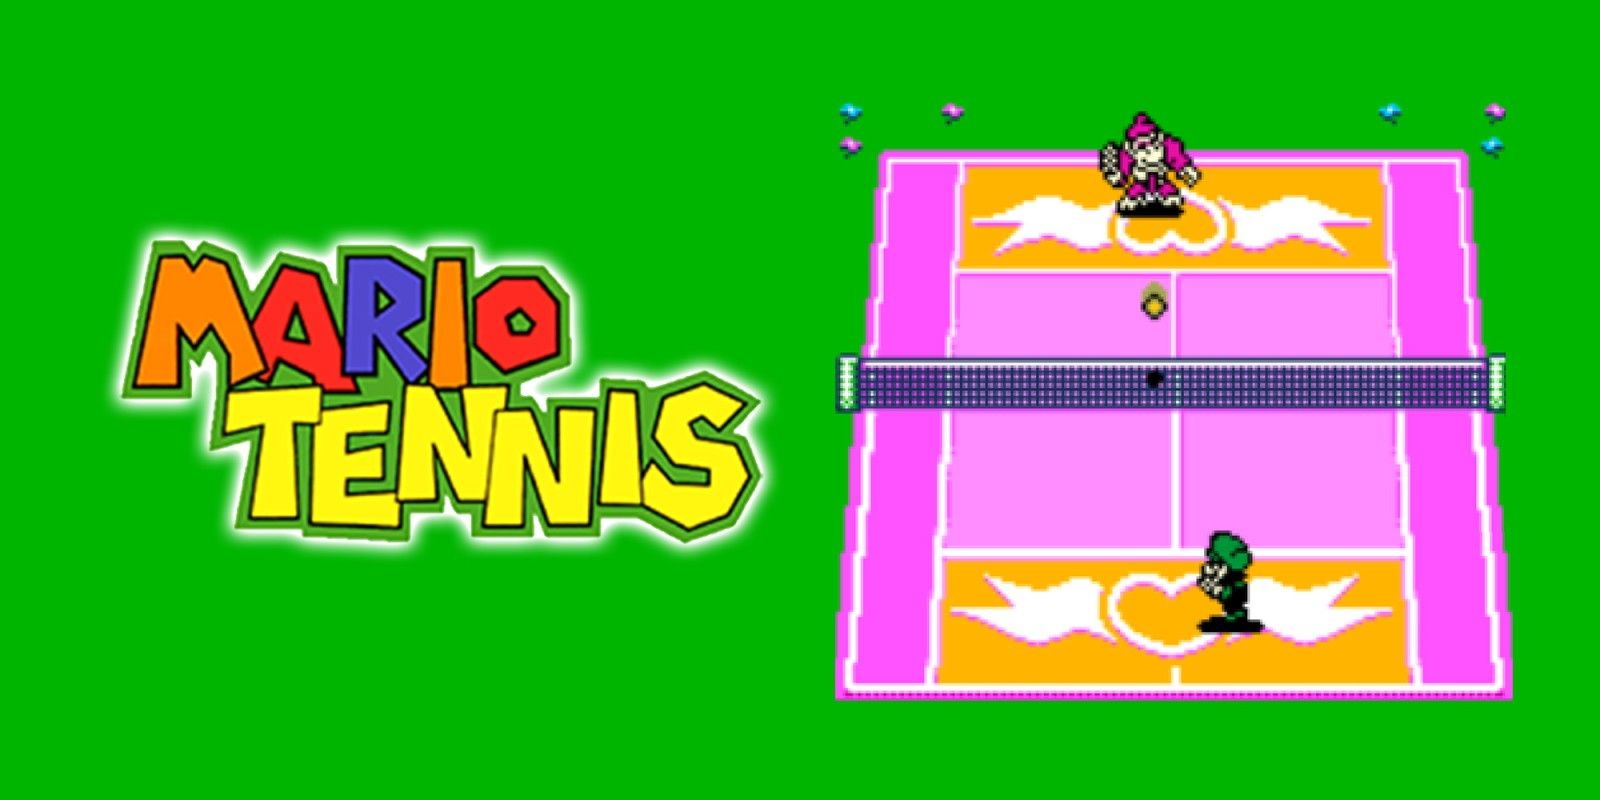 10 Best Mario Sports Games, Ranked